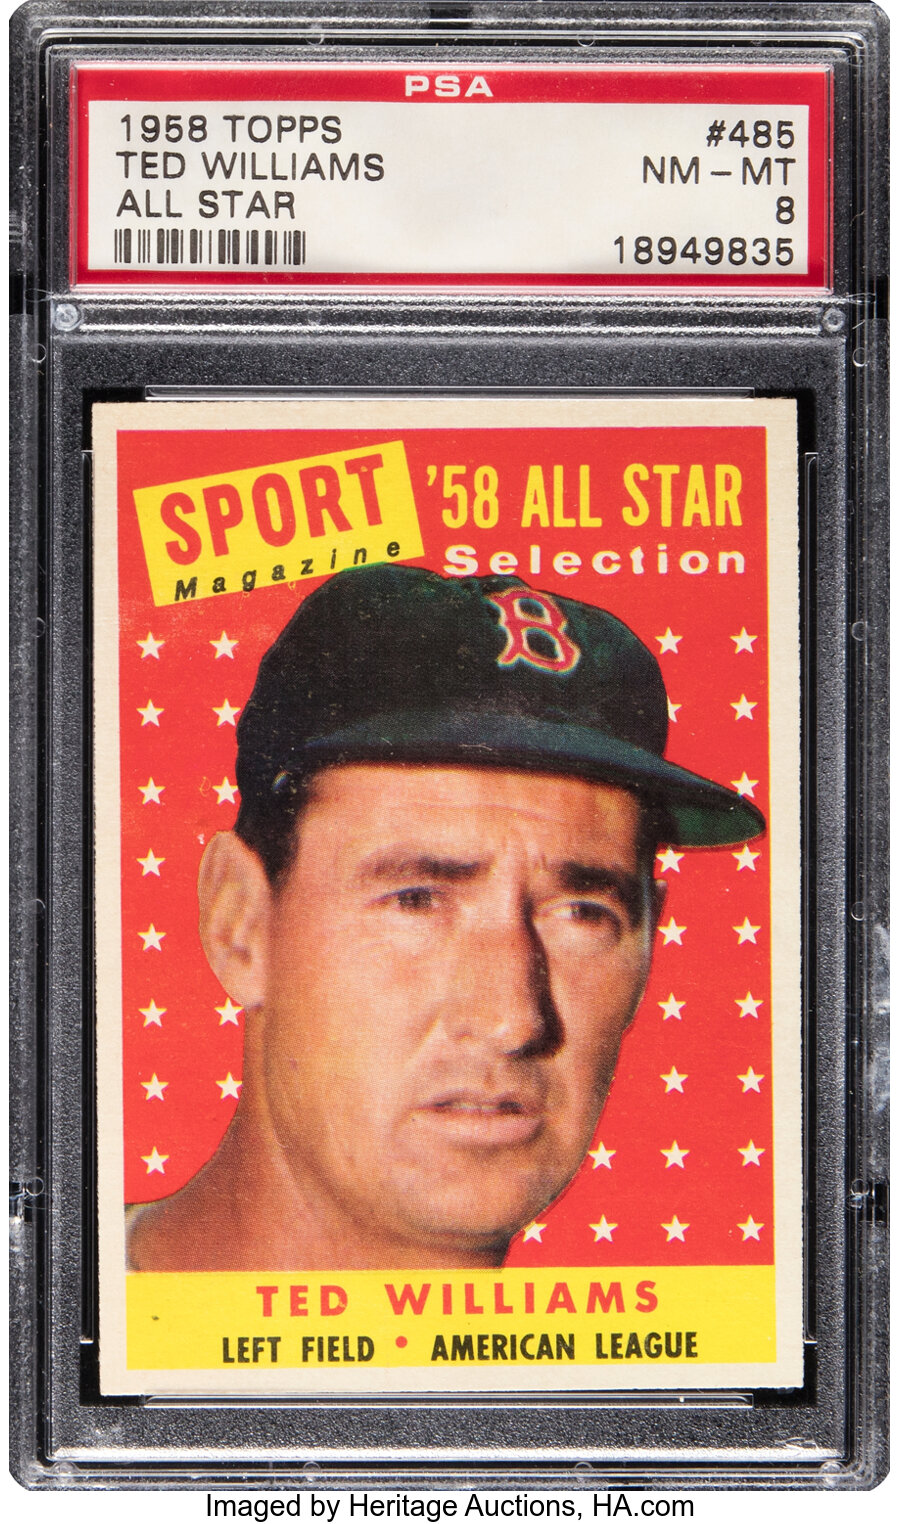 1958 Topps Ted Williams (All Star) #485 PSA NM-MT 8